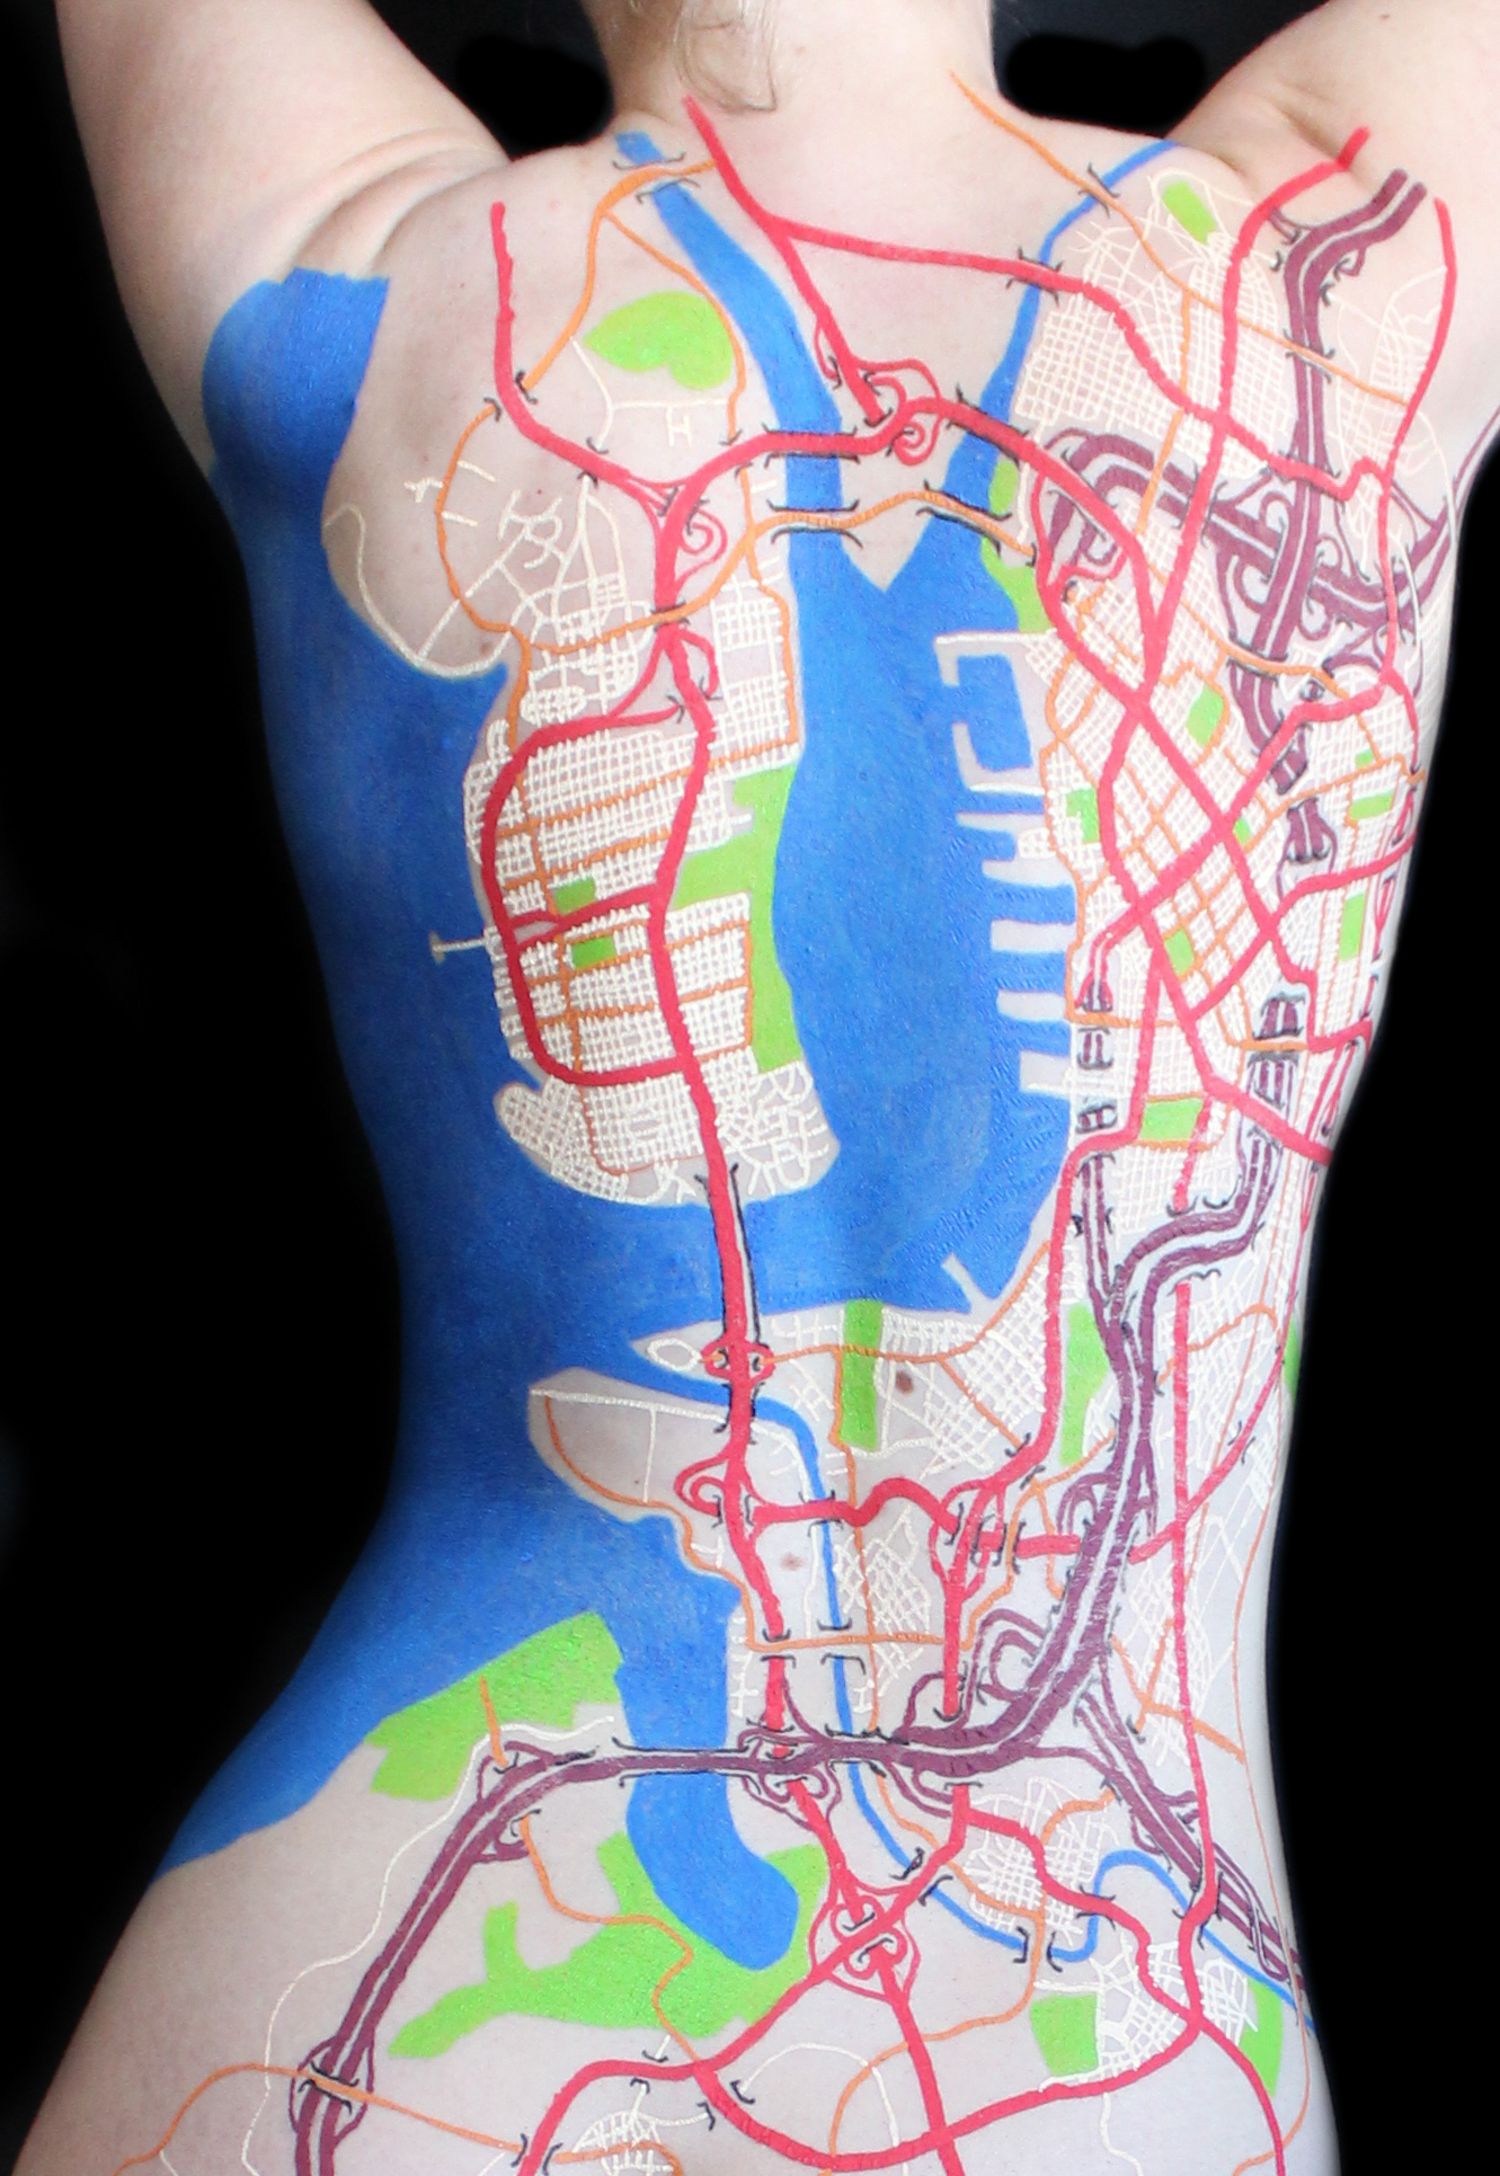 This Man Draws Fictional Maps on People’s Skin, and the Results are Beautiful!